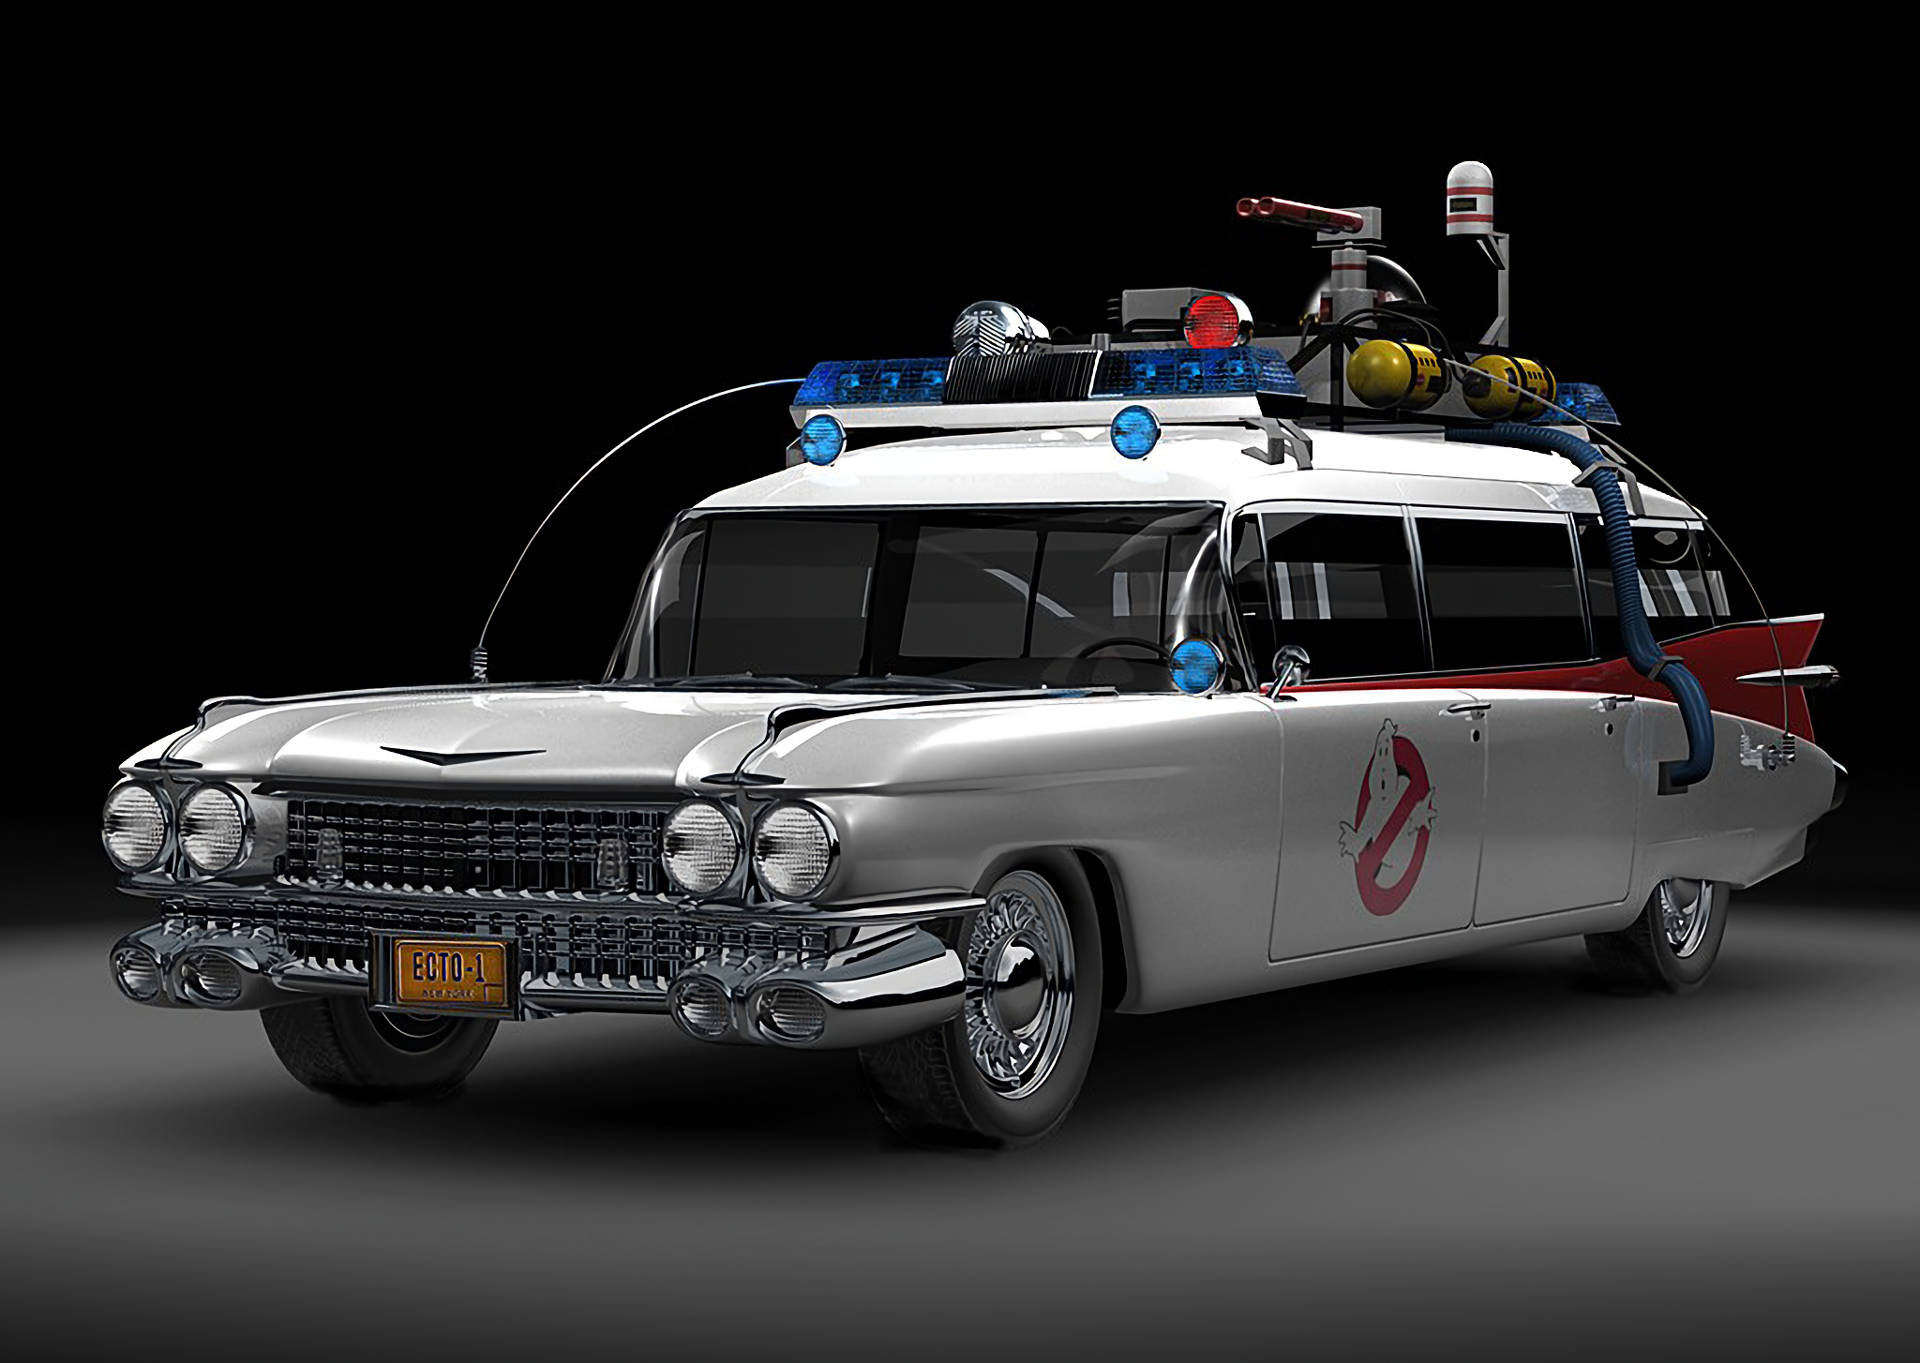 Get A Load Of The Iconic Ghostbusters' Ecto-1 Car Background